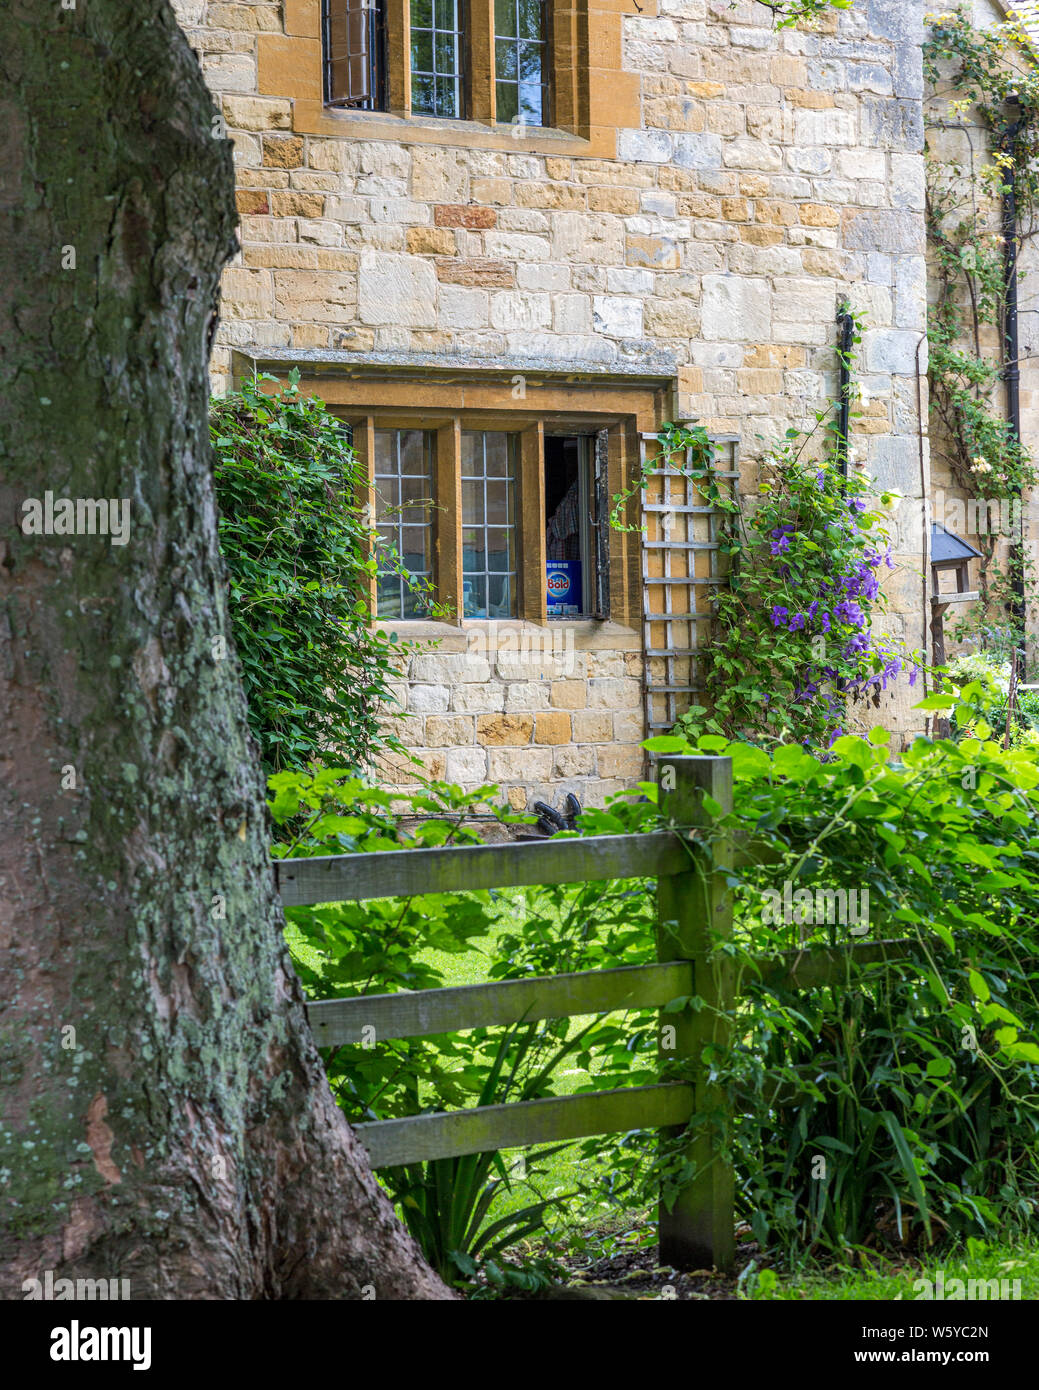 Country home and garden, Stanton, Gloucestershire, England, UK Stock Photo